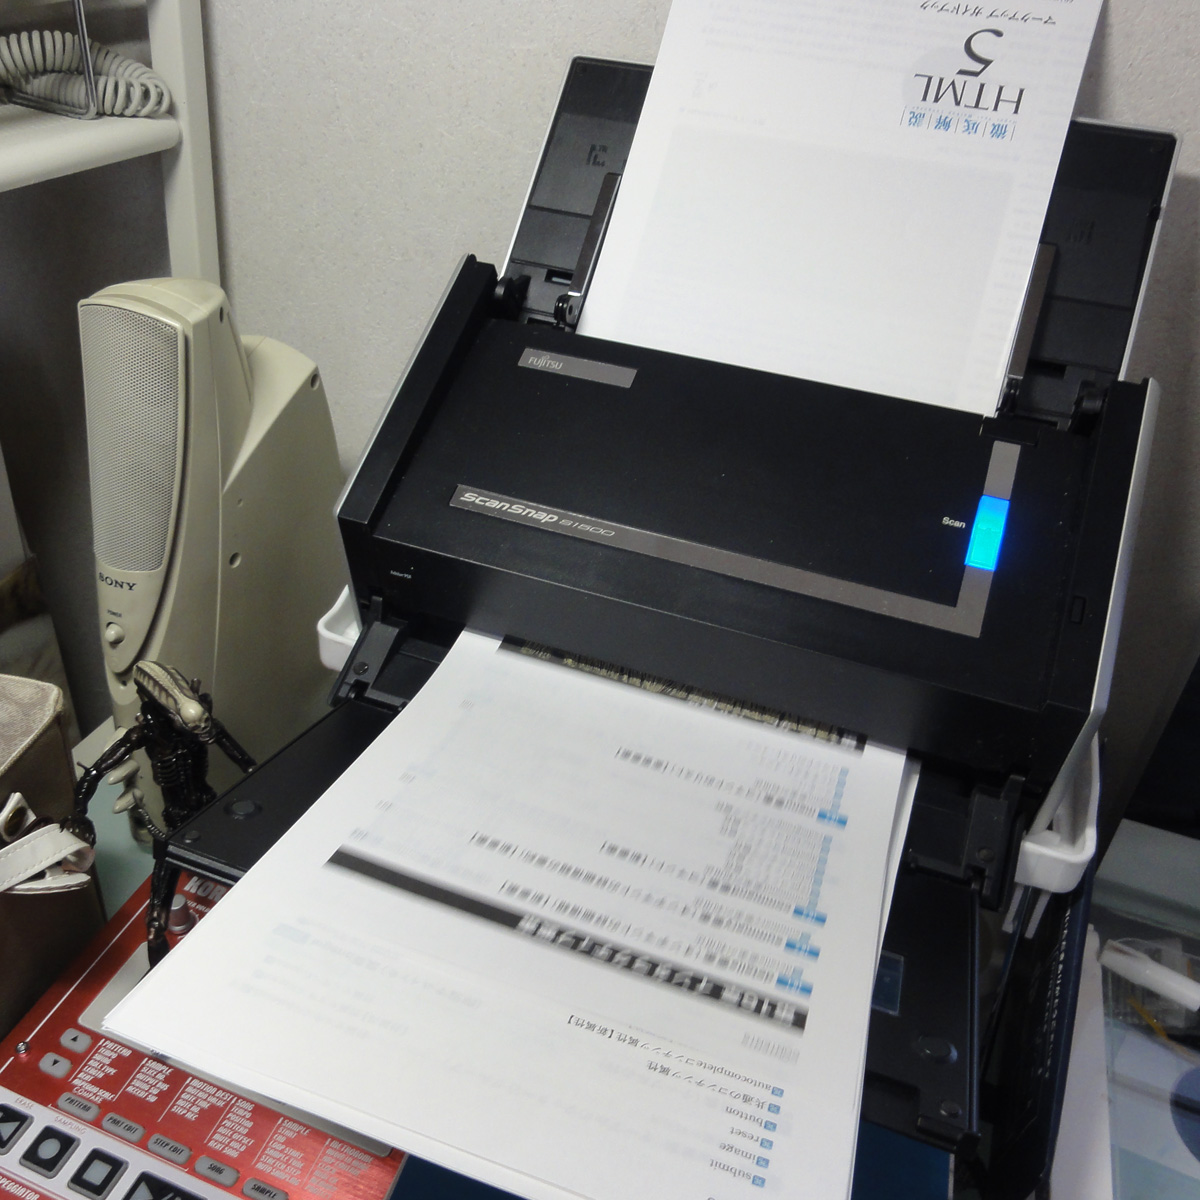 a sheet of paper is being pulled into a small printer